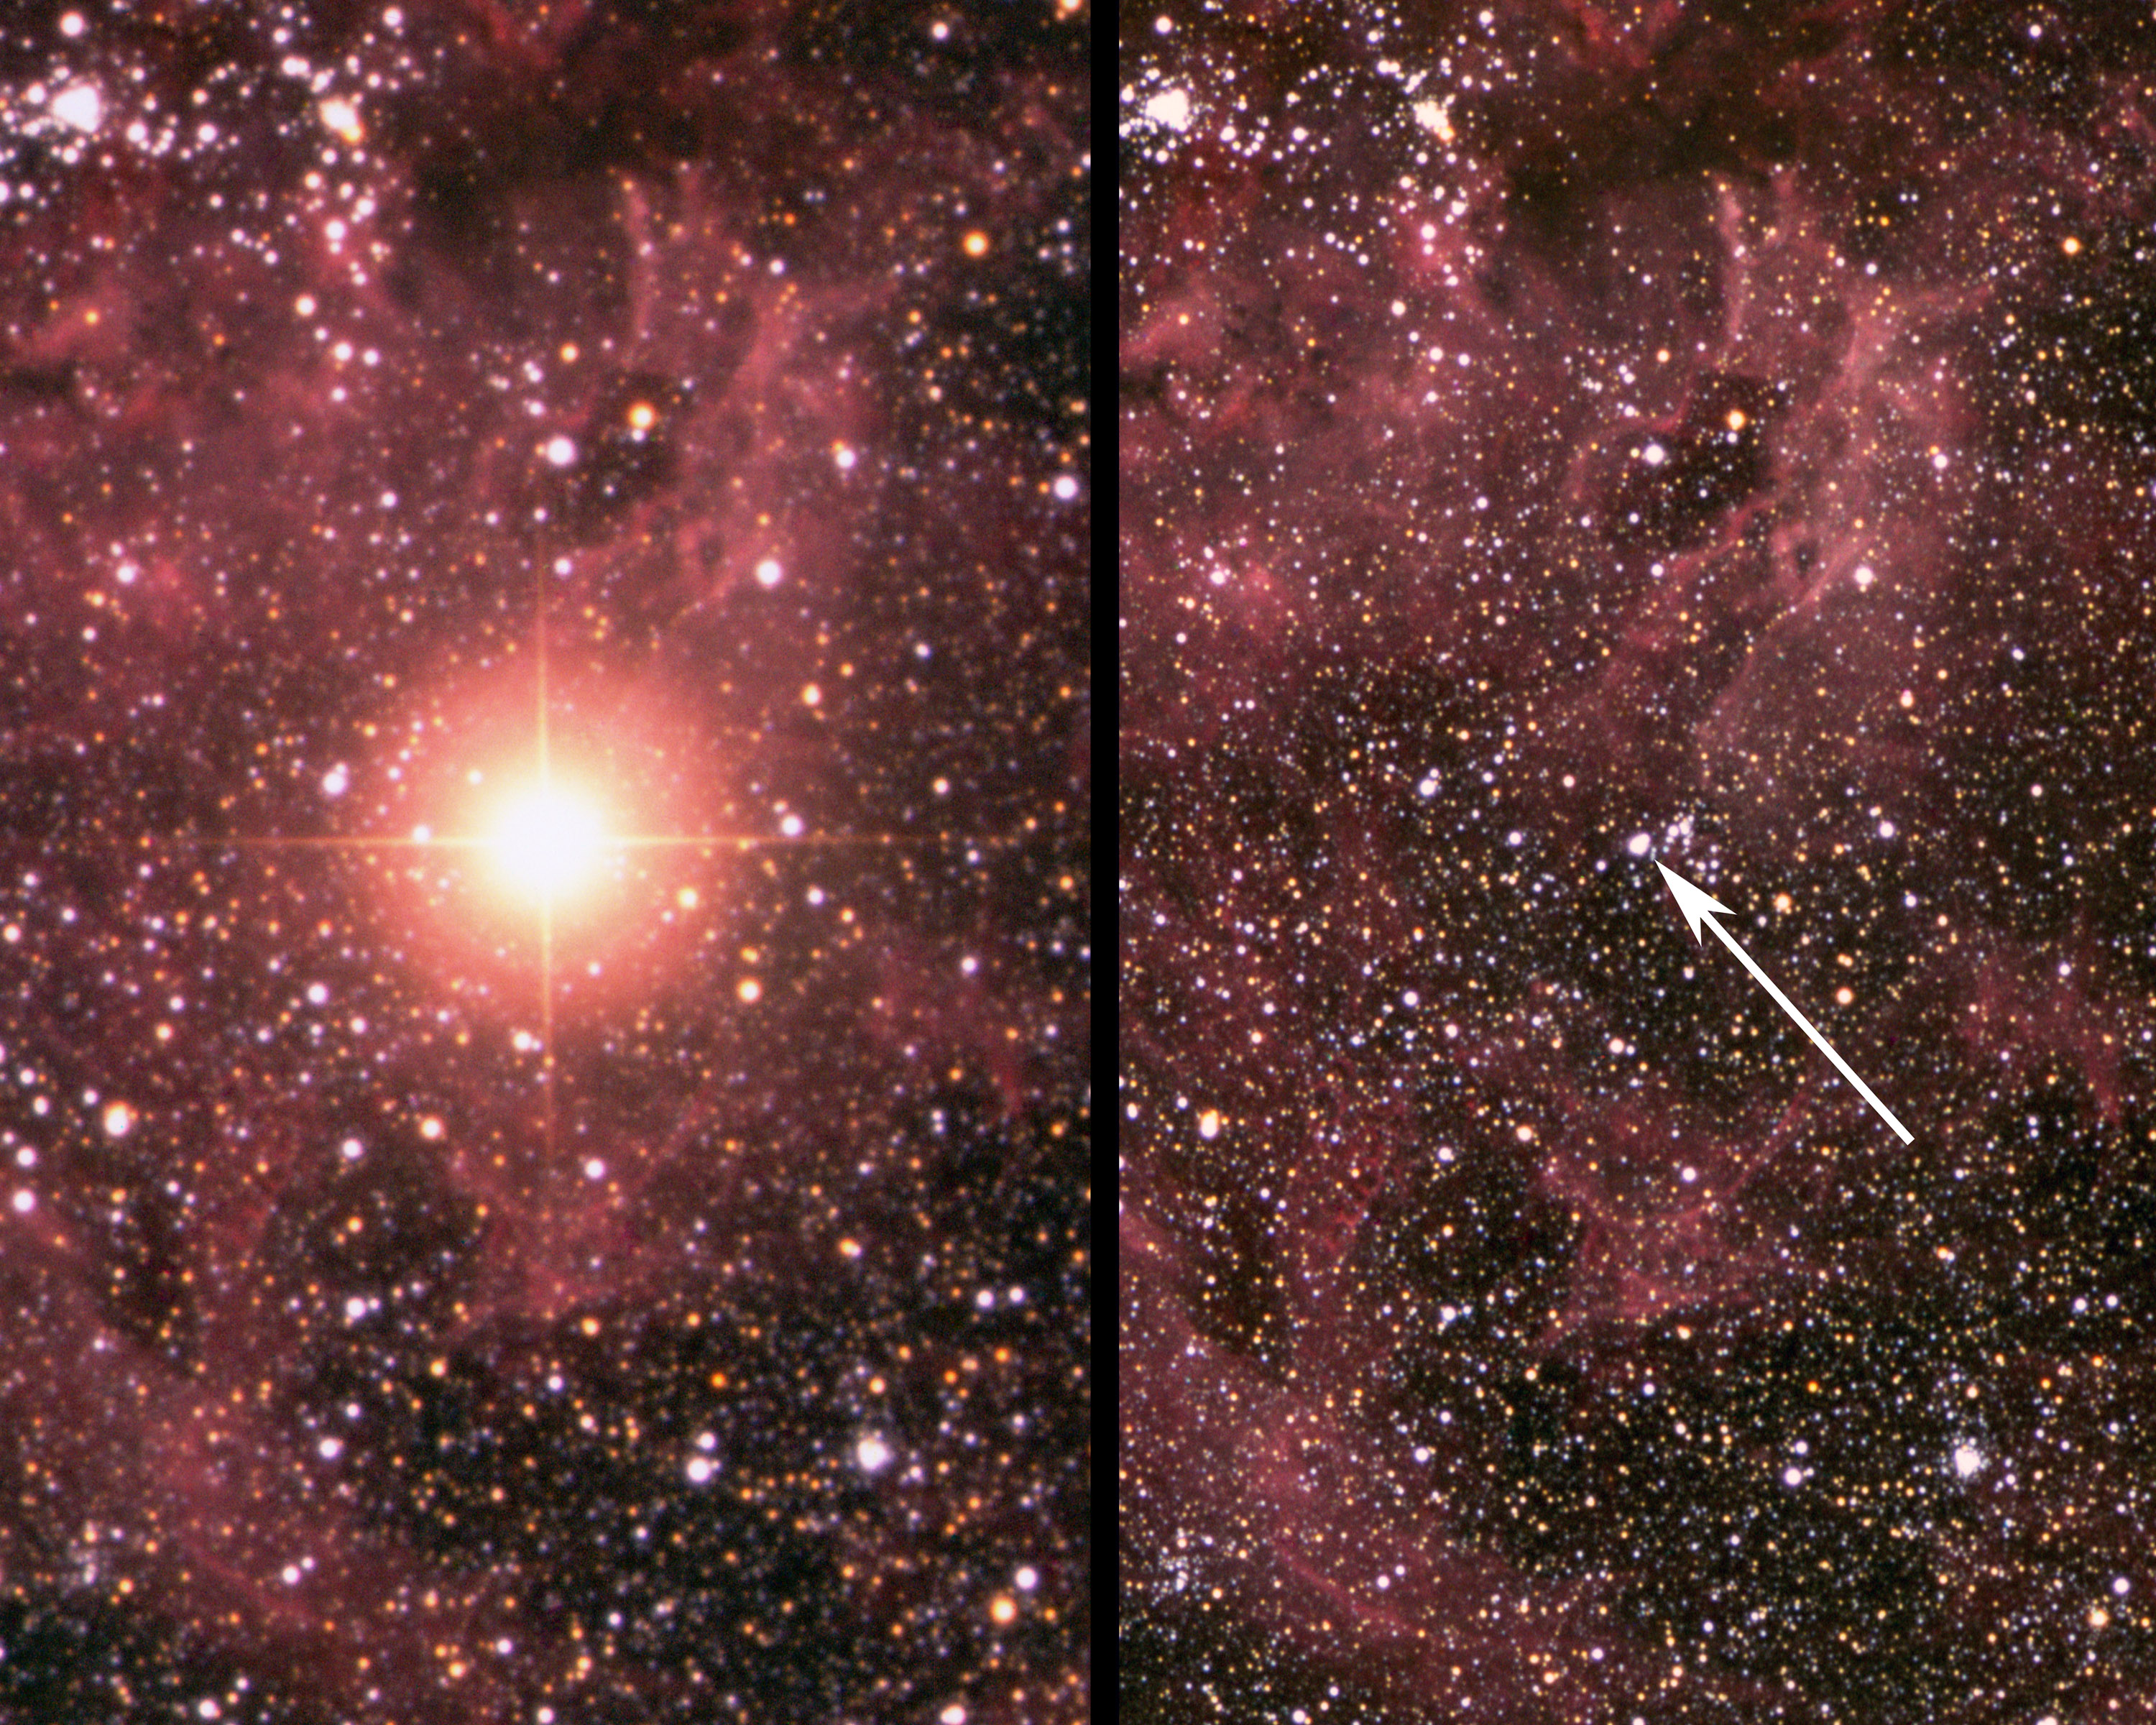 <span style="font-size:16px;position:relative;top:-60px">[Anglo-Australian Telescope/David Malin](https://www.aao.gov.au/news-media/media-releases/Supernova1987A-30)</span>